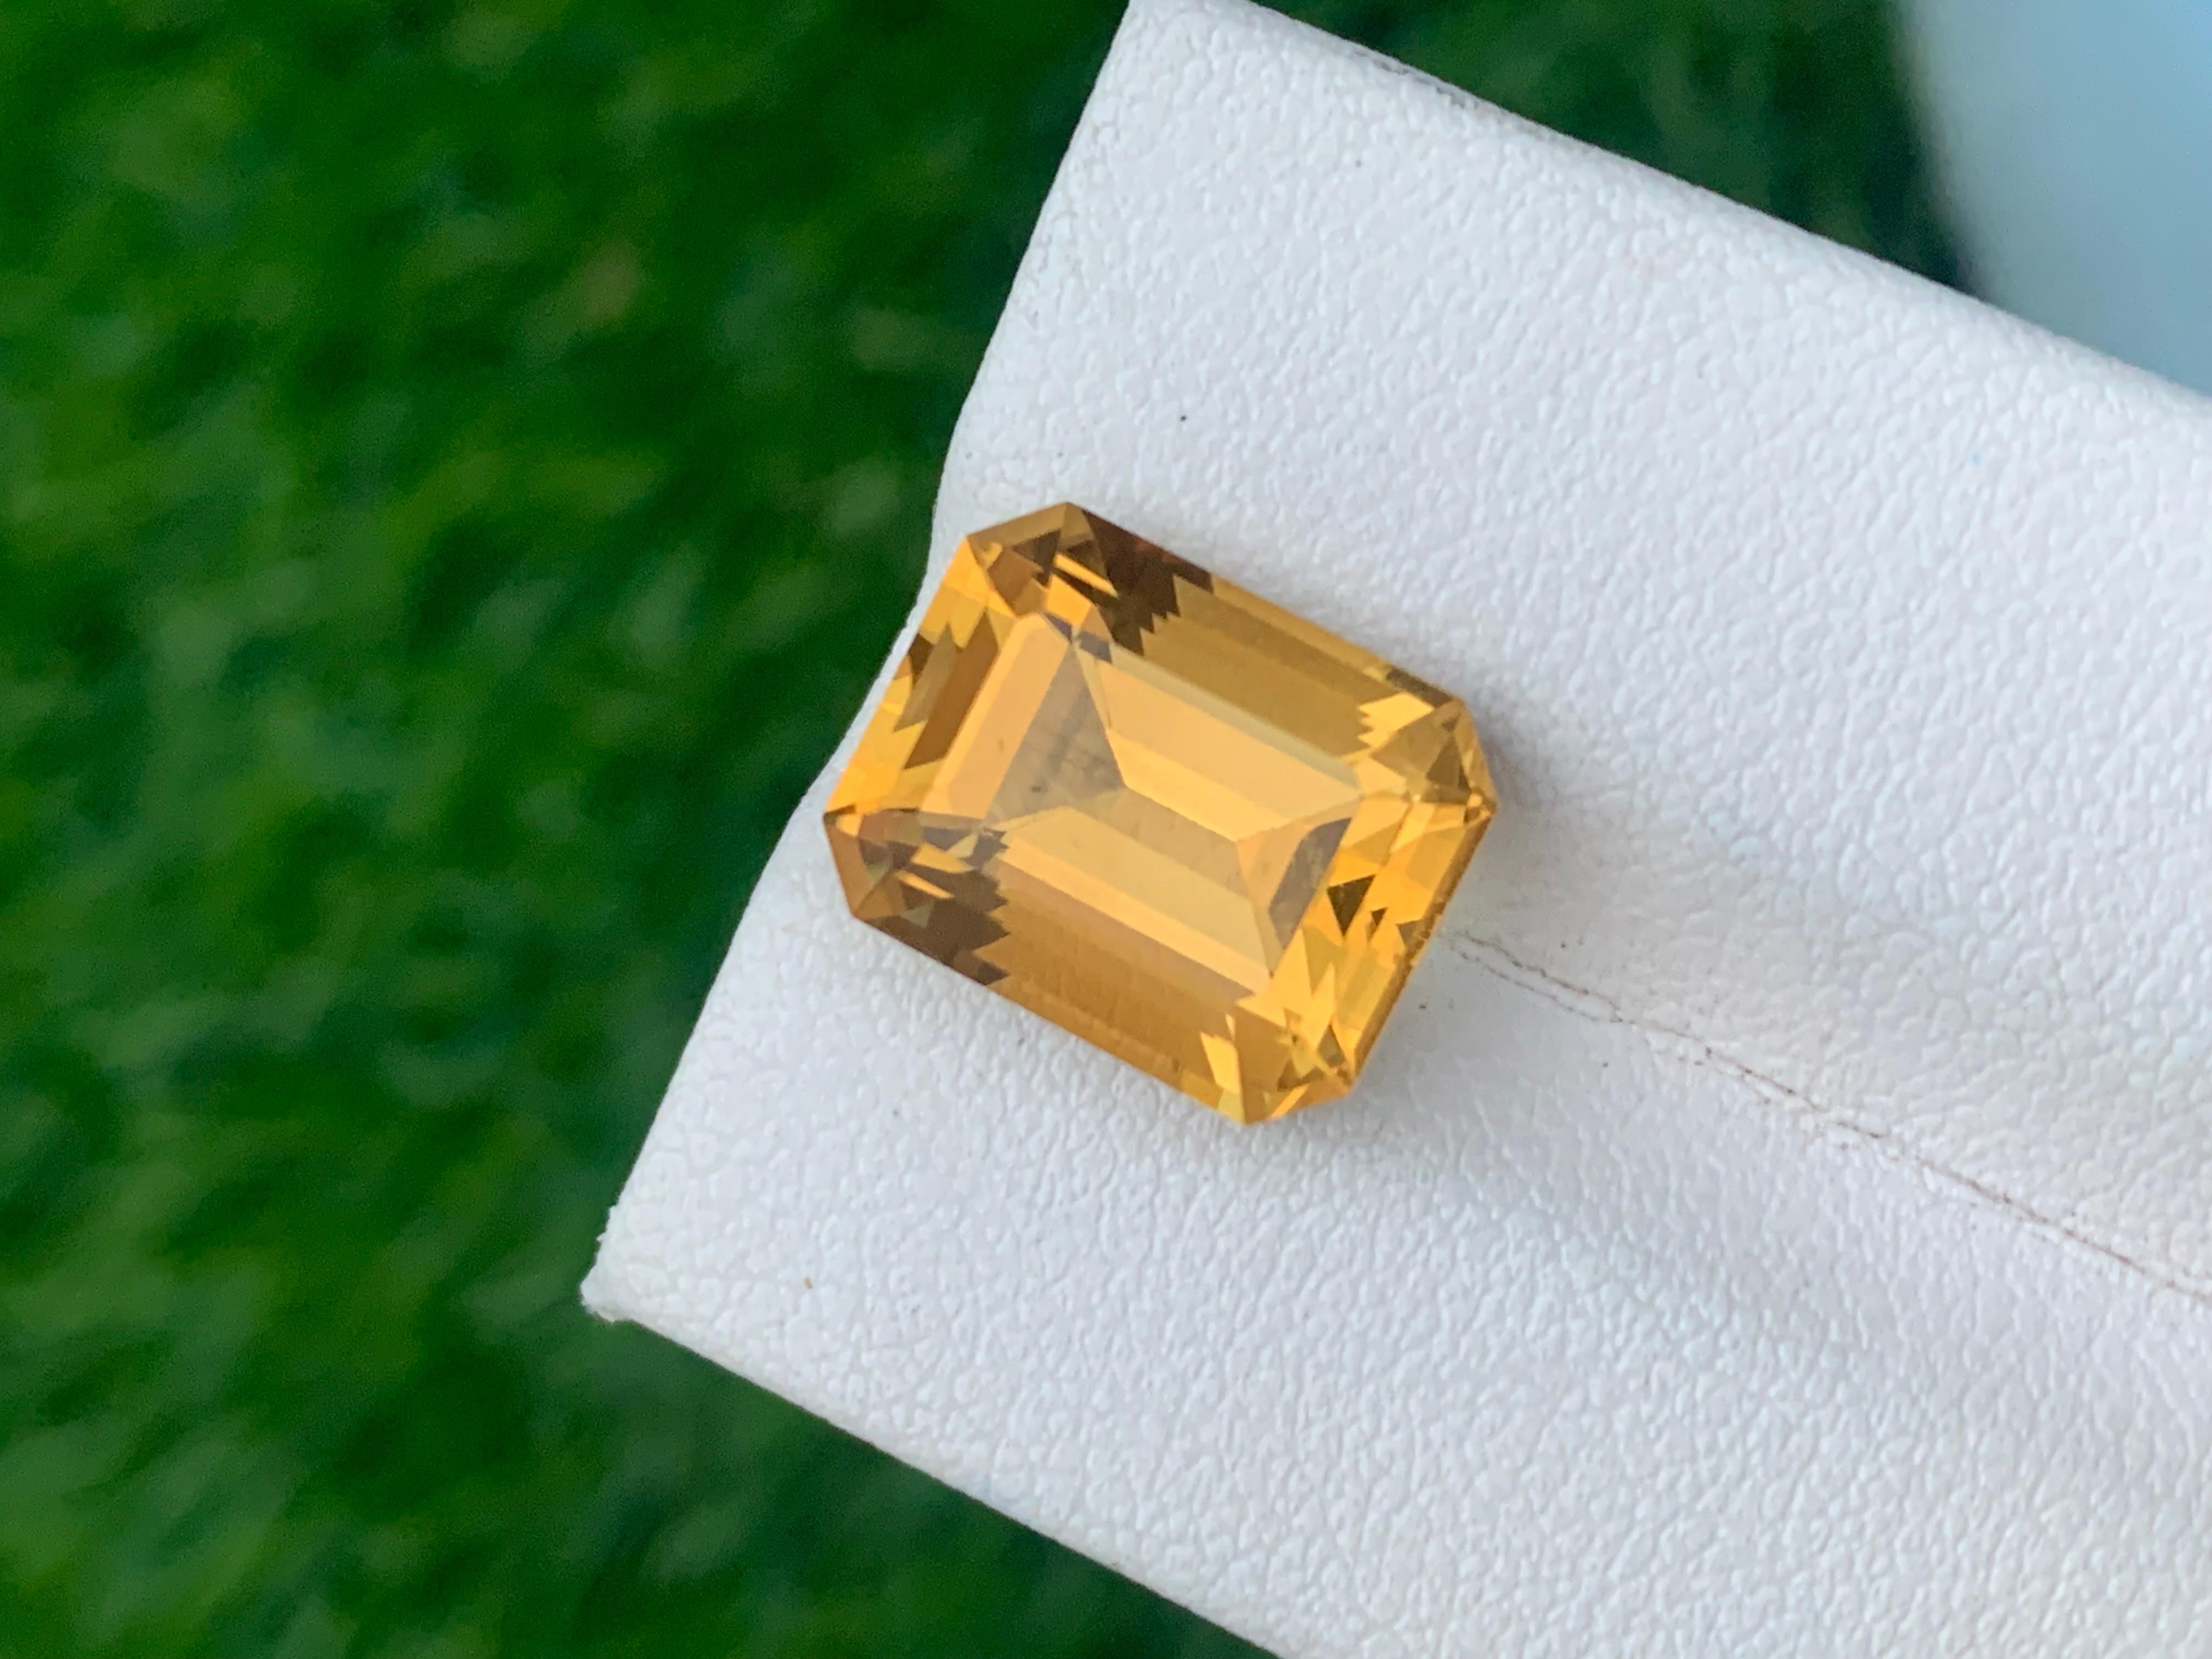 Faceted Citrine
Weight : 7.45 Carats
Dimensions : 13.3x10.4x8.3 Mm
Clarity : Clean
Origin : Brazil
Color: Yellow
Shape: Emerald
Certificate: On Demand
Month: November
.
The Many Healing Properties of Citrine
Increase Optimism, And Sunny